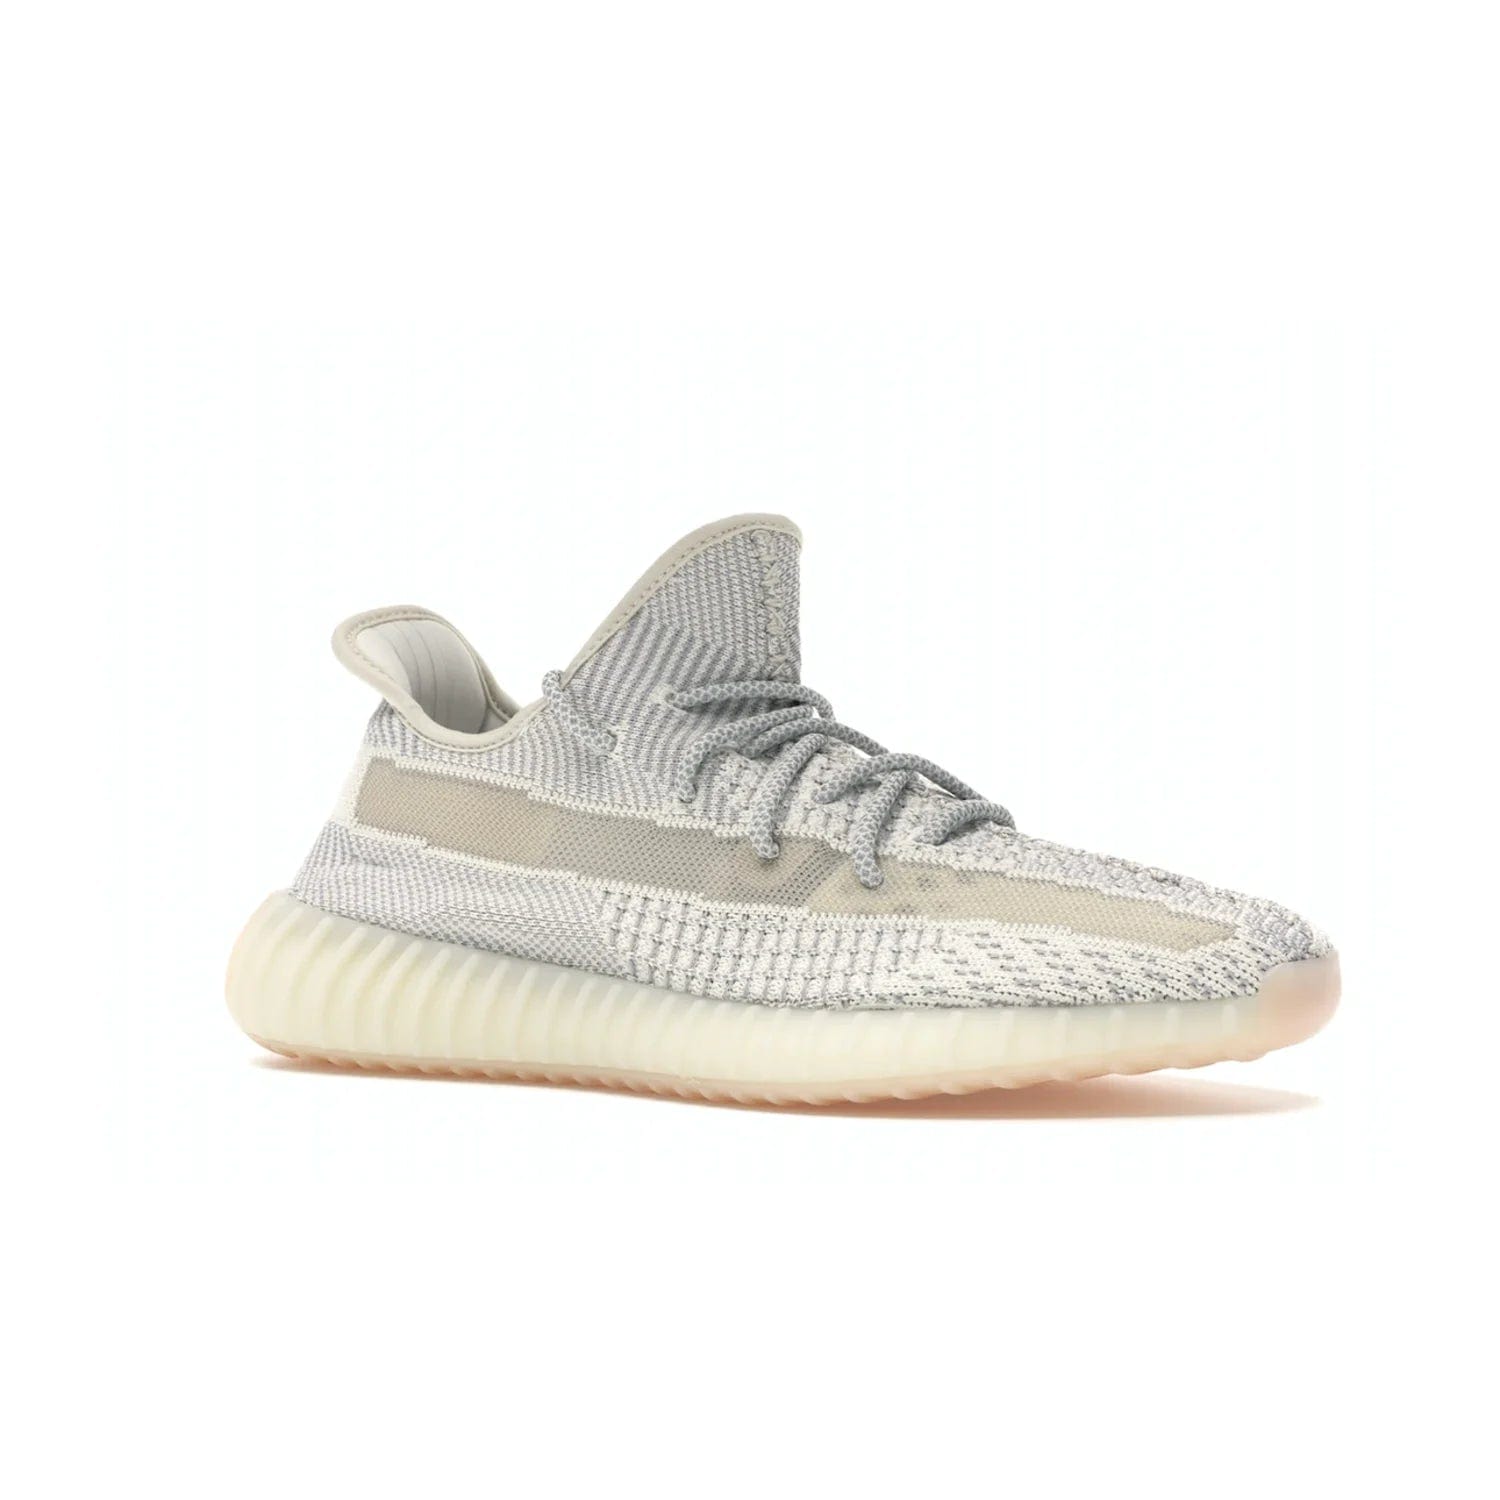 adidas Yeezy Boost 350 V2 Lundmark (Non Reflective) - Image 4 - Only at www.BallersClubKickz.com - Shop the exclusive adidas Yeezy Boost 350 V2 Lundmark with a subtle summer color, mesh upper, white-to-cream transitional midsole, light tan outsole, and pink middle stripe. Comfort and style come together in this perfect summer 350 V2. Released on July 11, 2019.